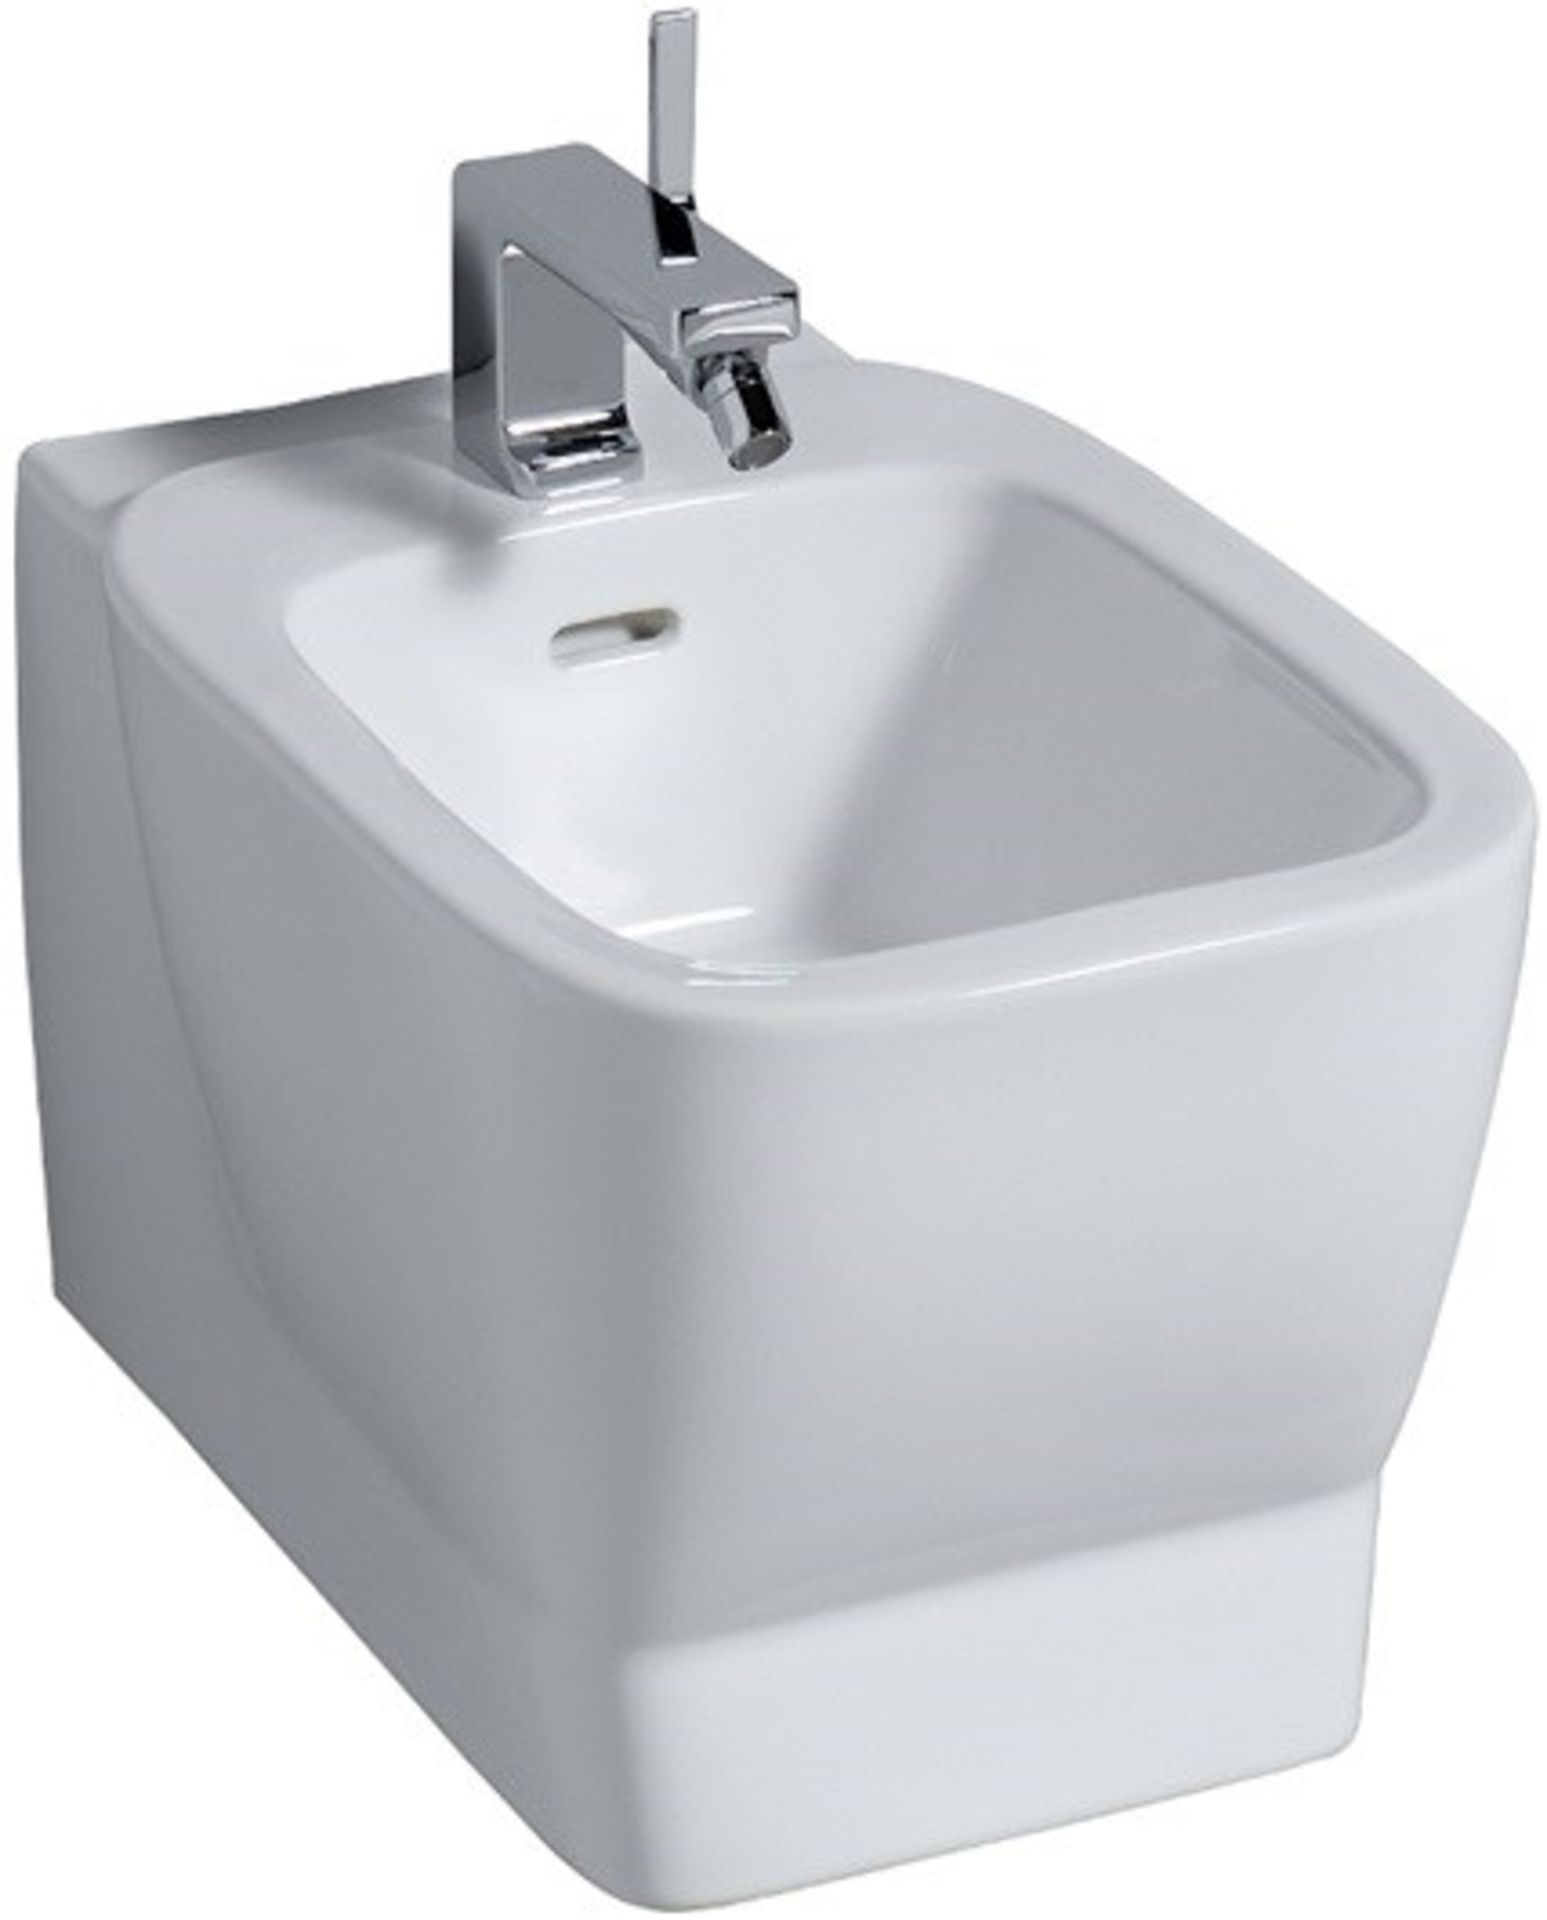 (UR36) Silk 540mm Bidet. RRP £369.99.The Silk bathroom collection is packed with many thoughtf... - Image 4 of 4